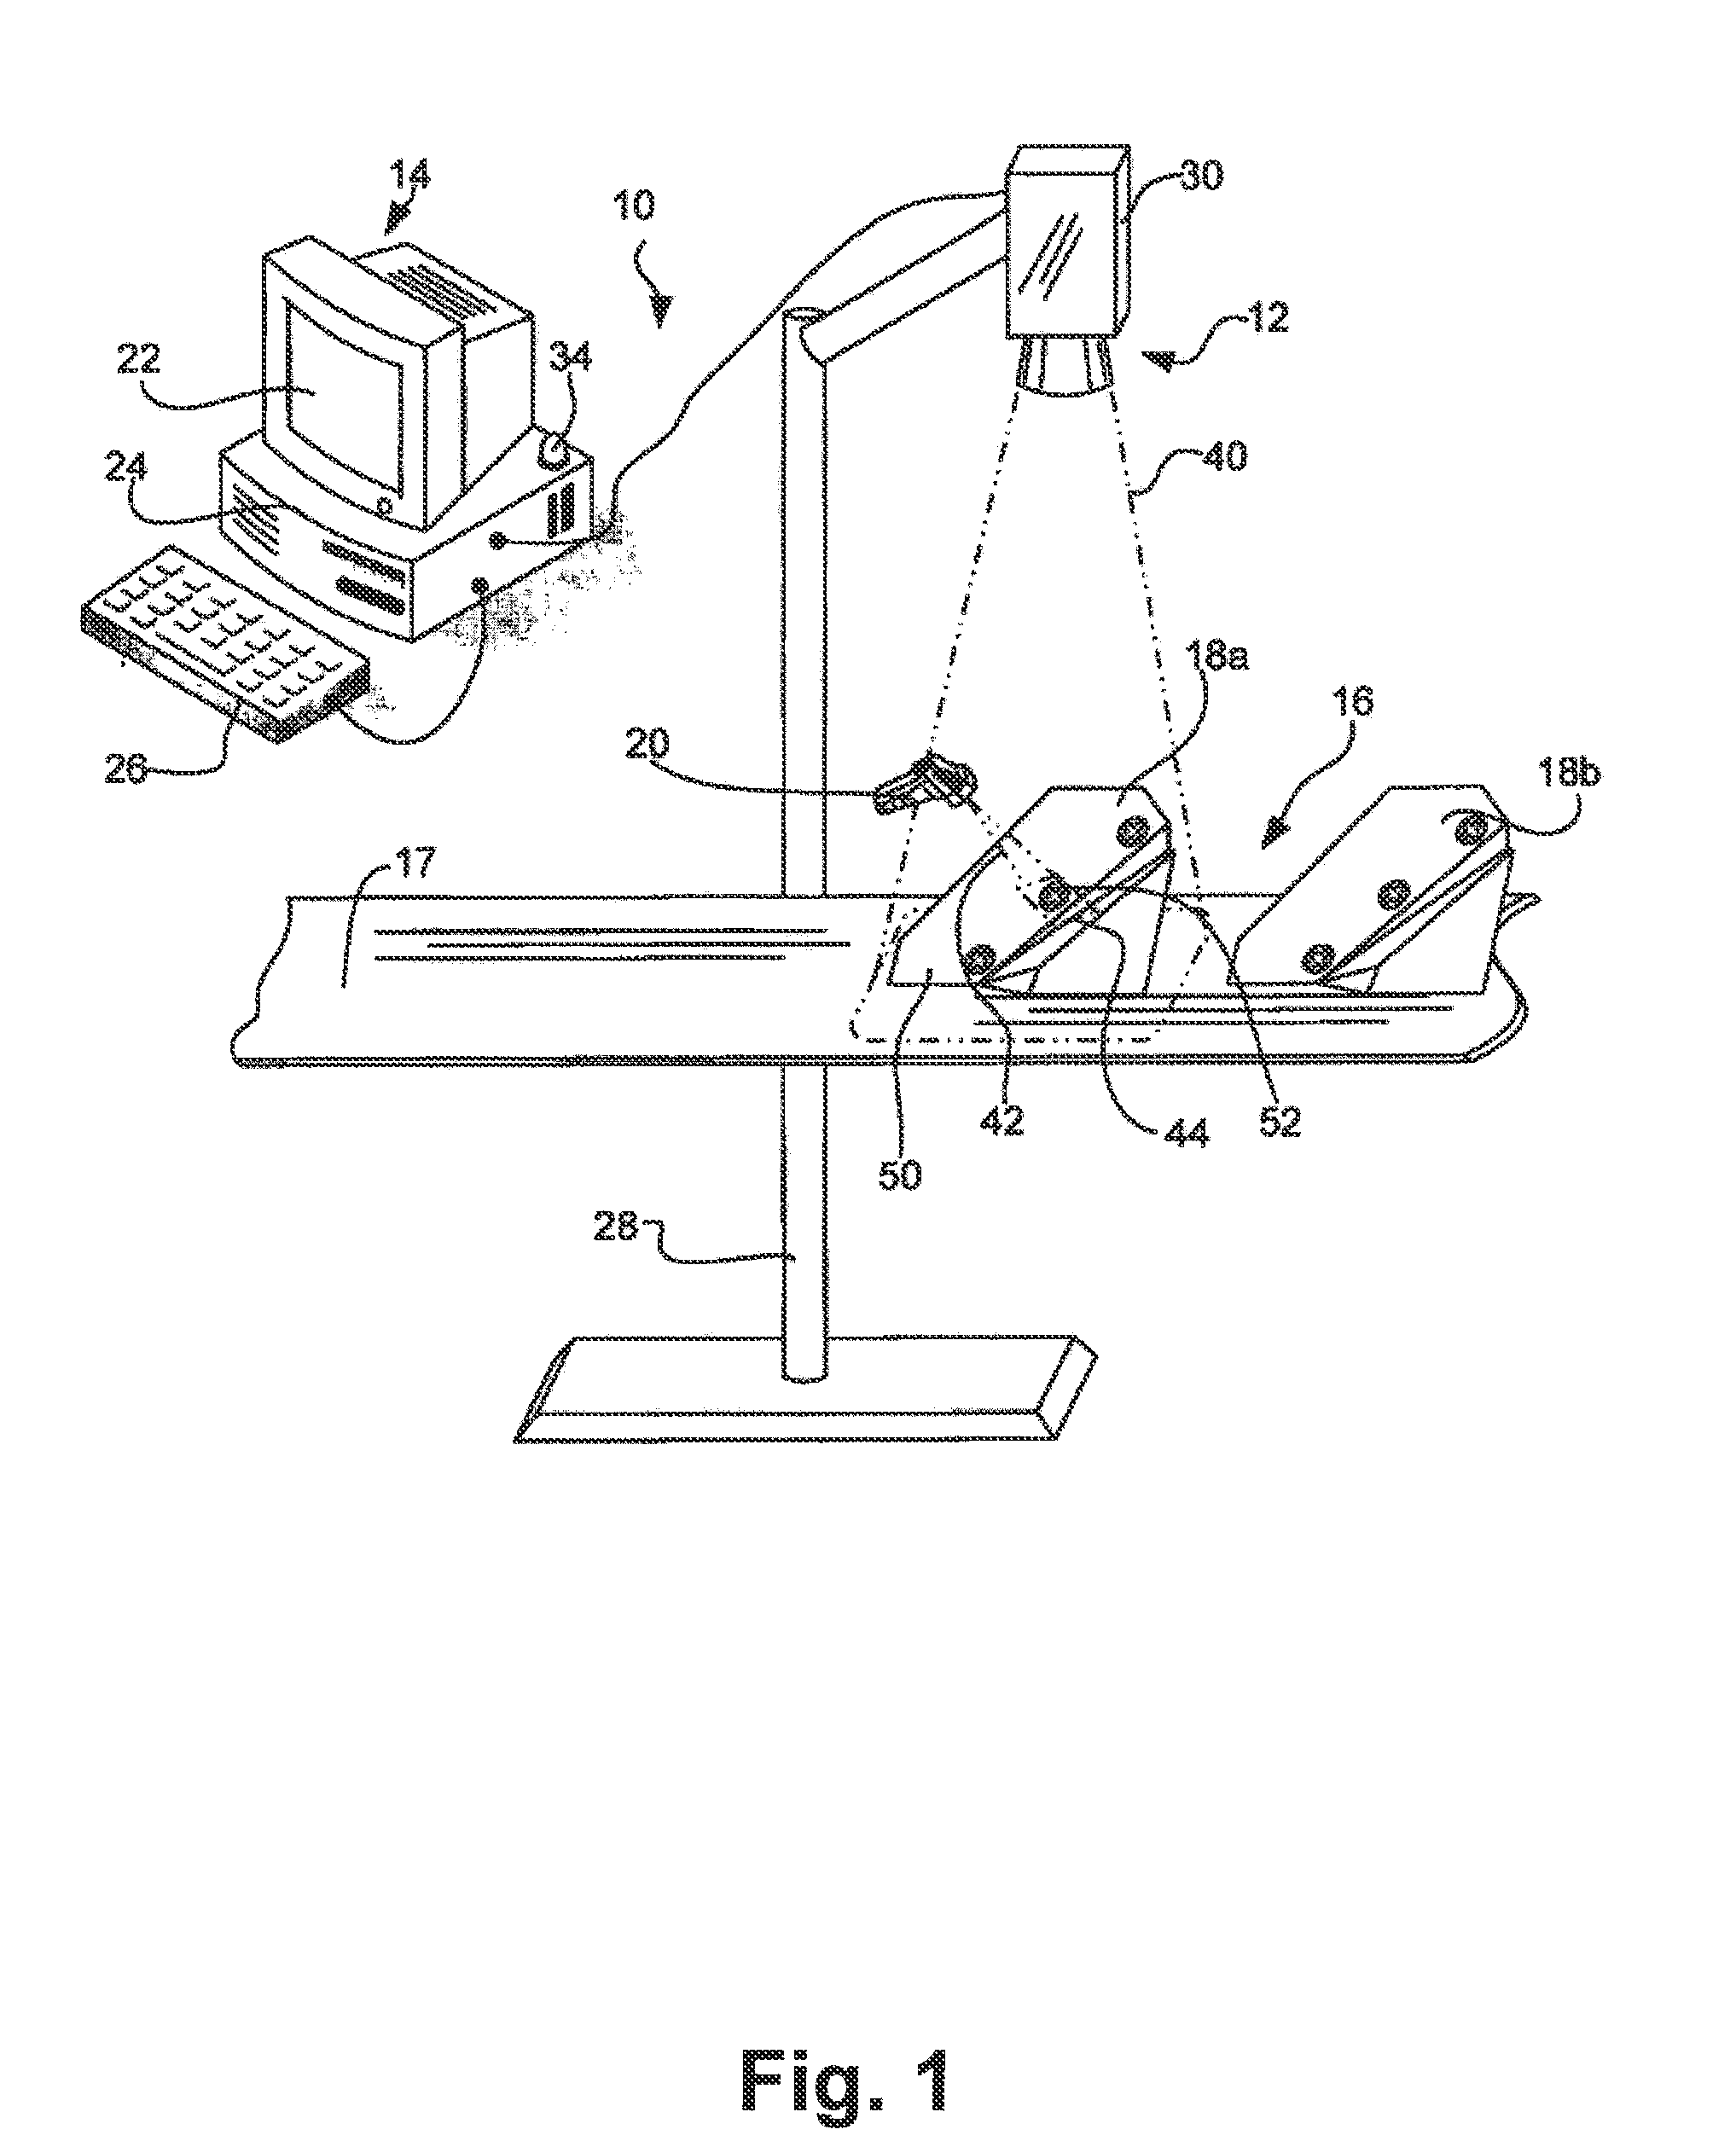 Deformable Light Pattern for Machine Vision System